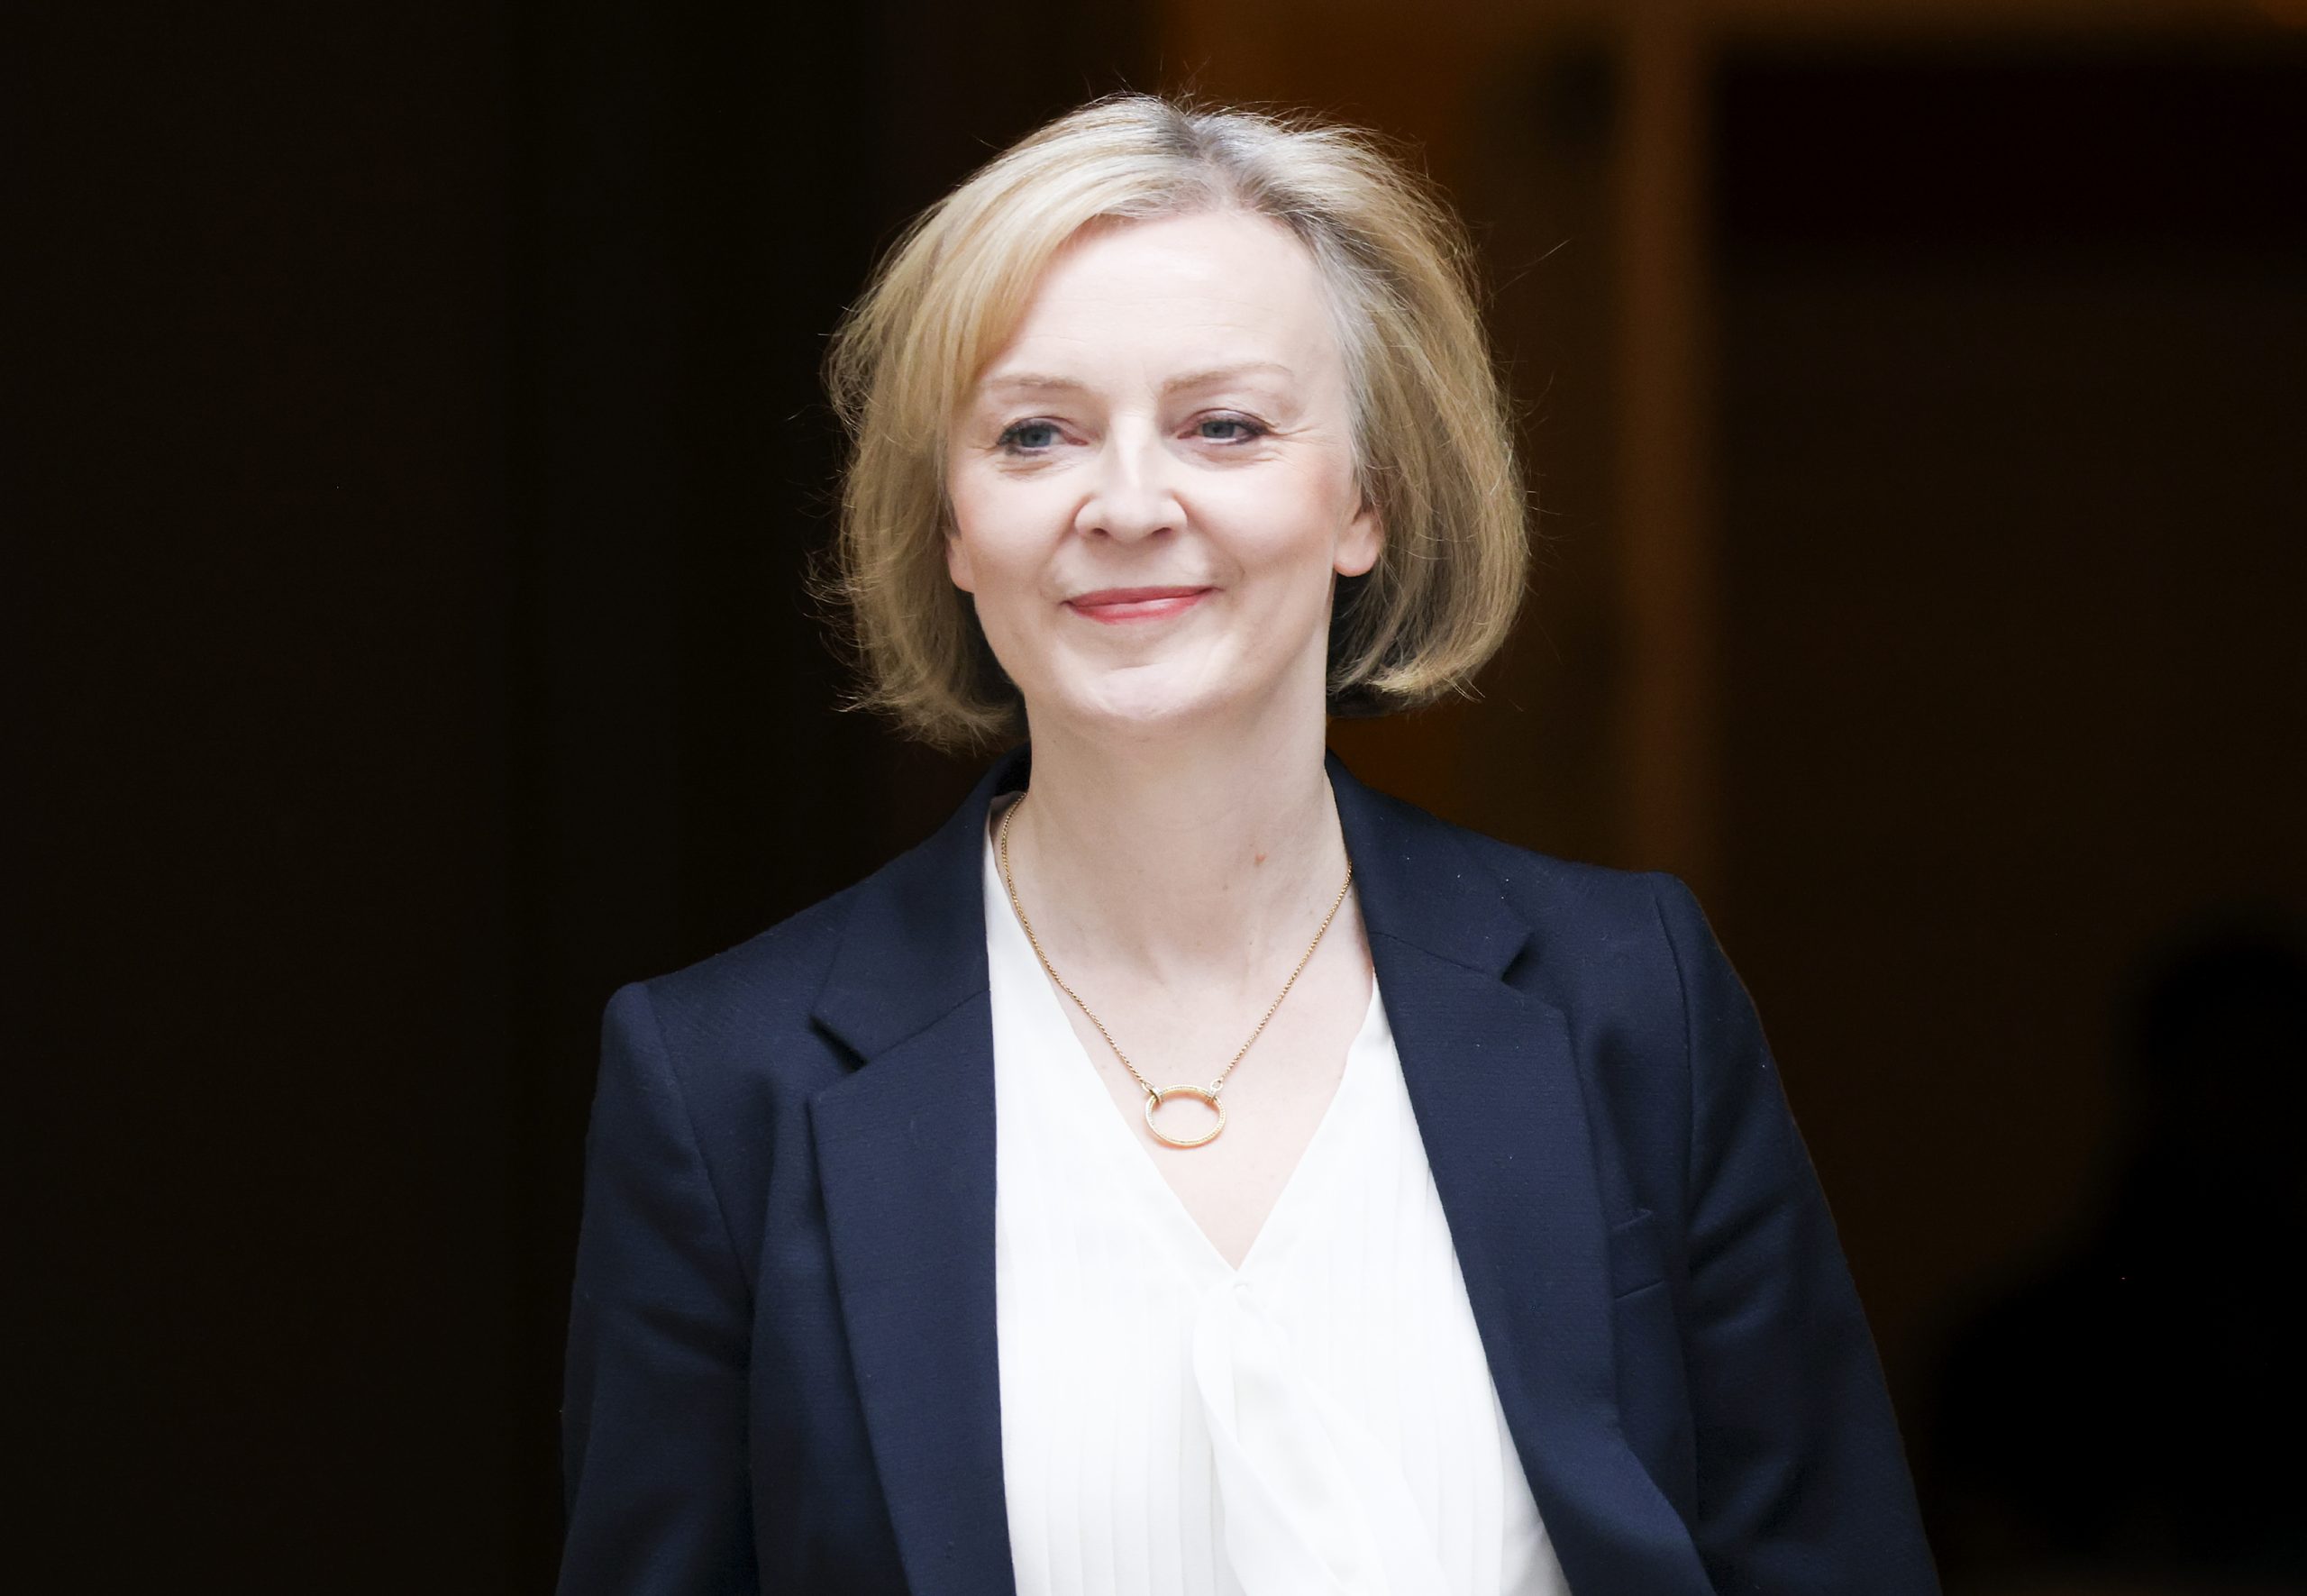 A photo of the current Prime Minister Liz Truss leaving No 10 Downing Street leaving for Prime Minister's Questions.